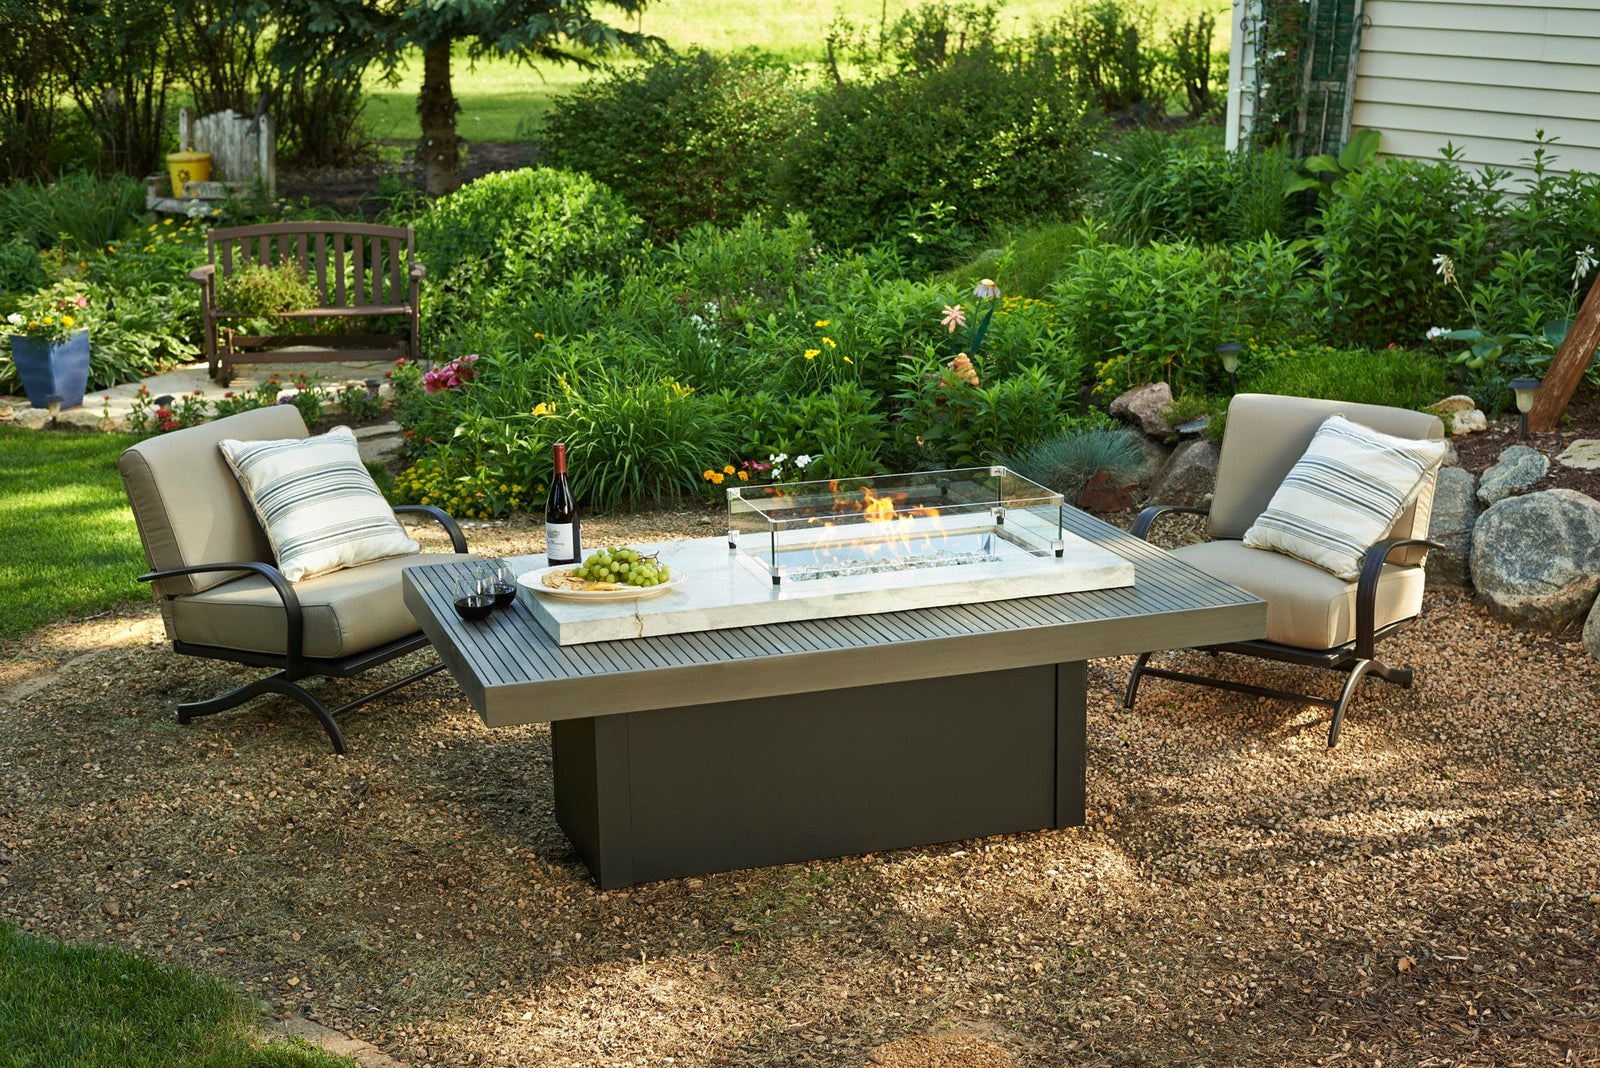 5 Garden Ideas to Match Your Outdoor Style